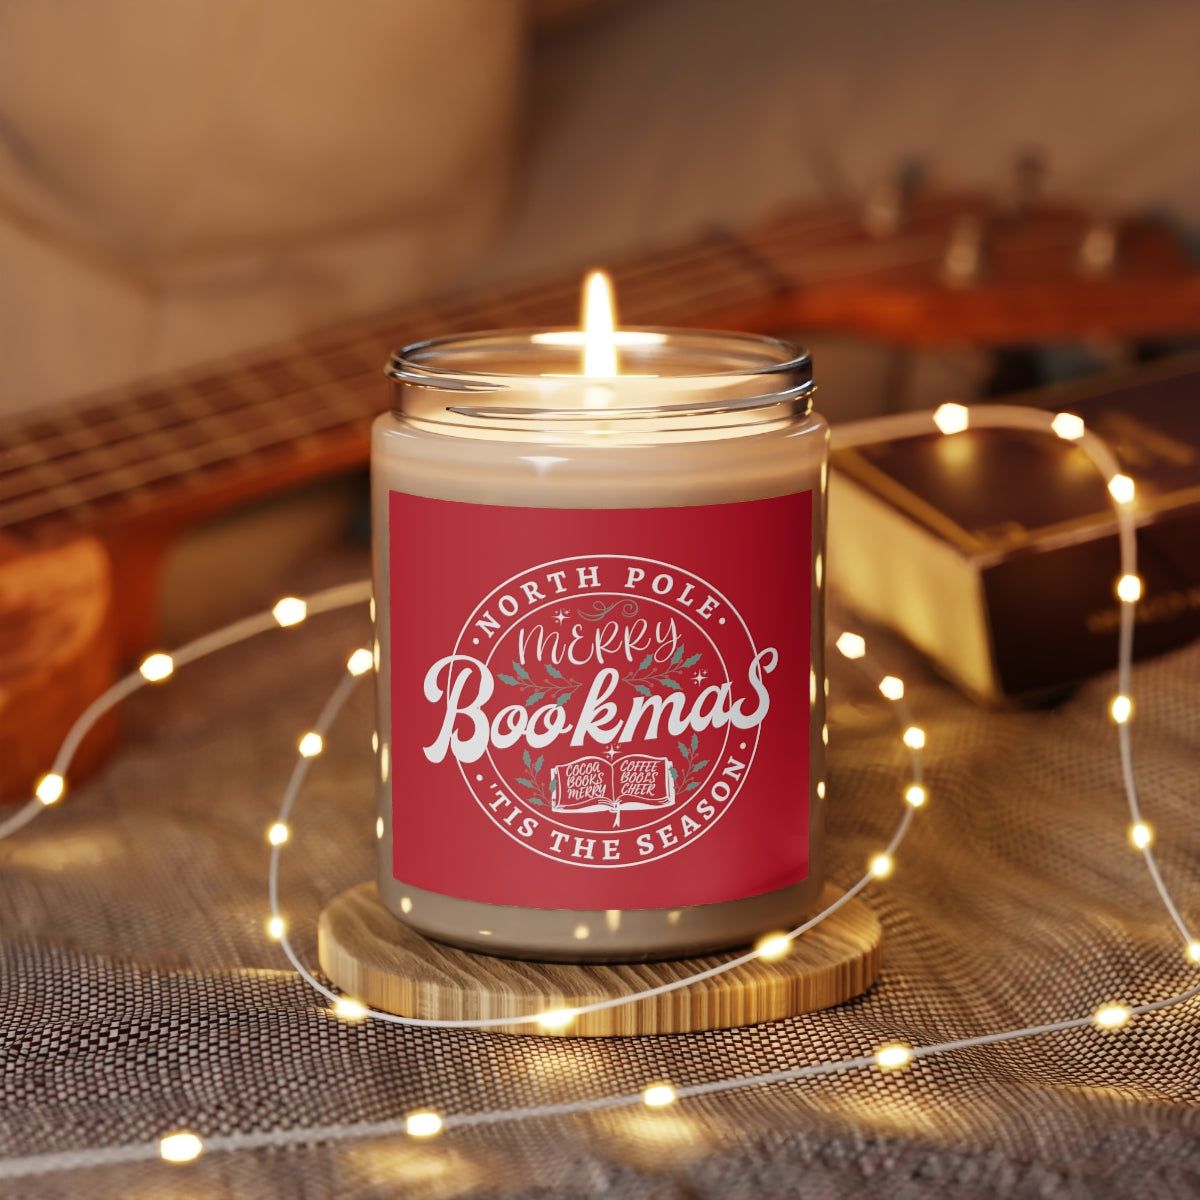 Bookmas Scented Candle, 9oz